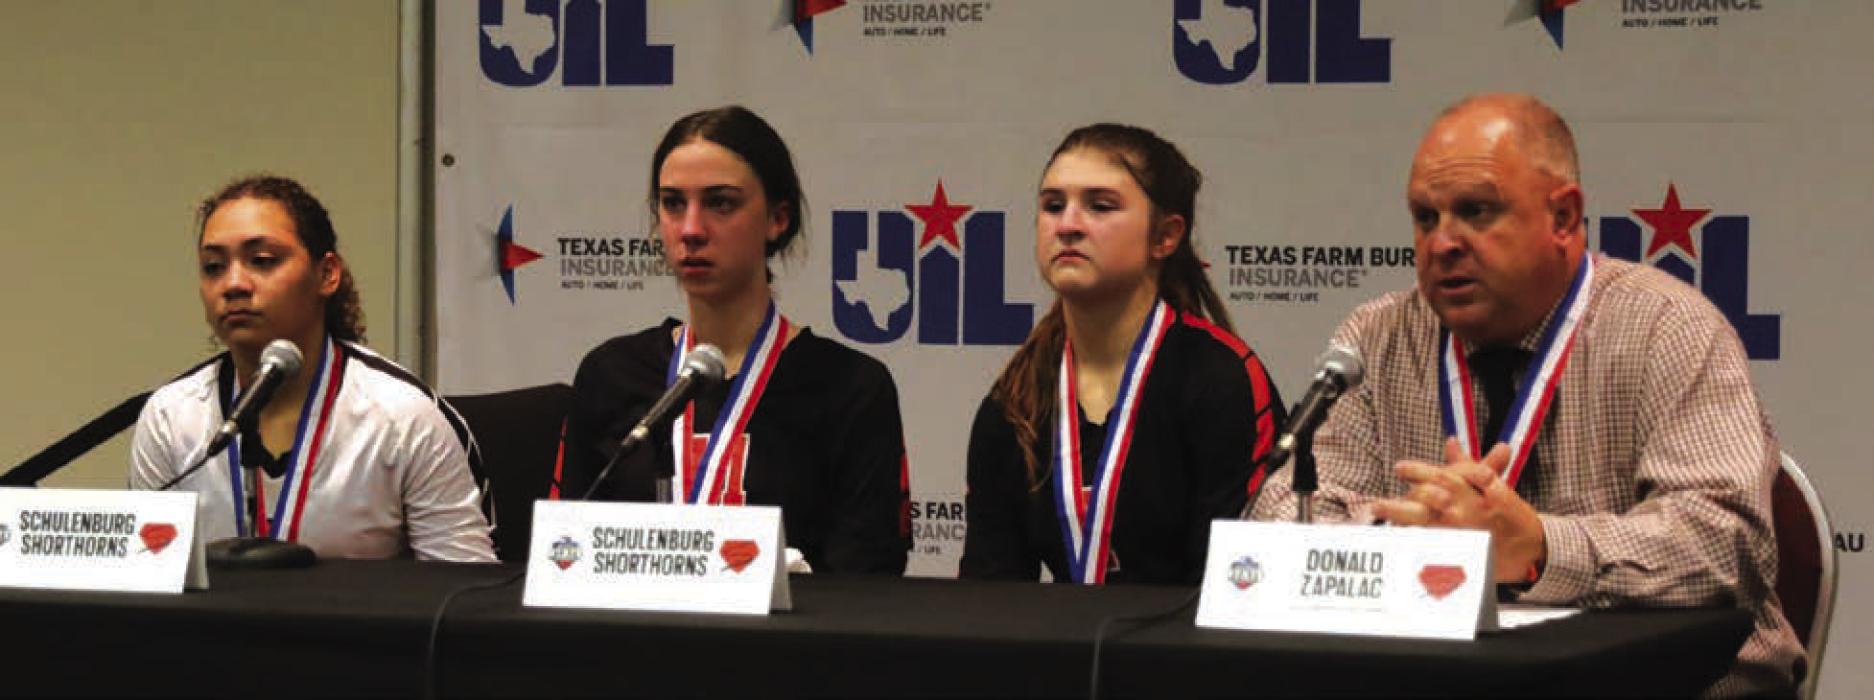 Left to right: Schulenburg’s Kieryn Adams, Meredith Magliolo, Landry Zapalac and head coach Donald Zapalac answer questions in the press conference after the state semifinals. Photo by Audrey Kristynik